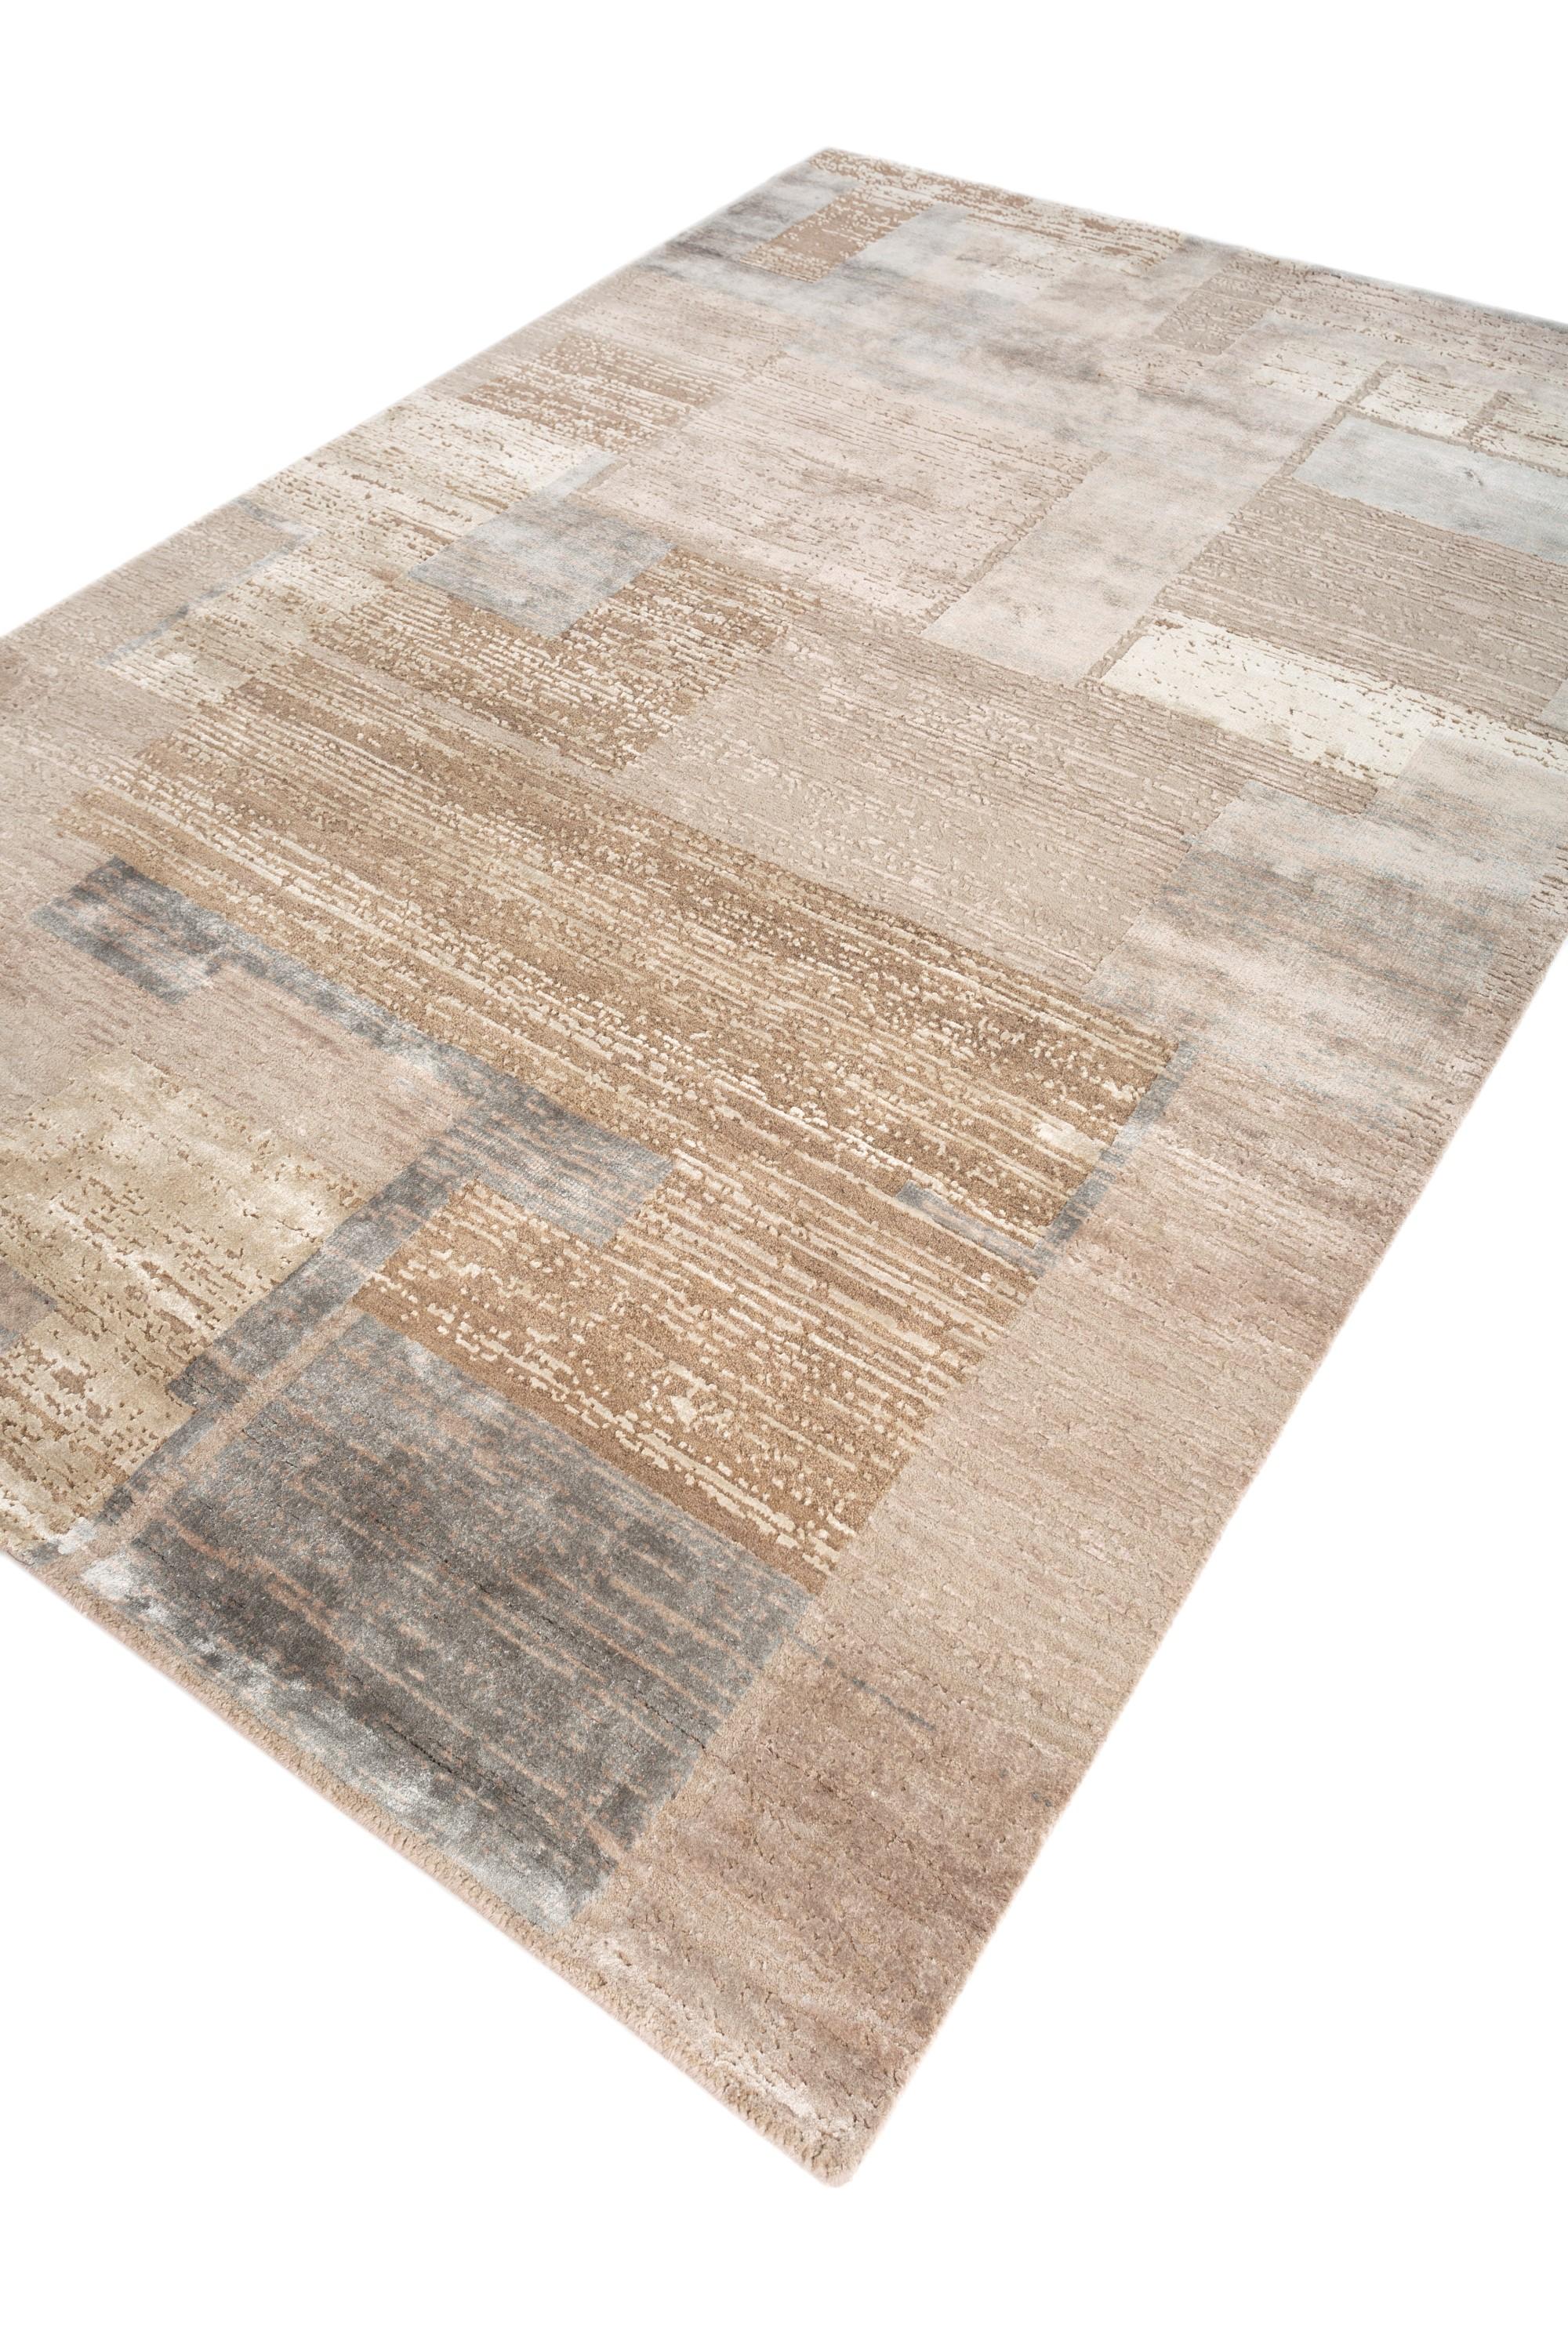 Indian Tranquil Turmoil Dark Ivory & Stucco 180X270 Cm Modern Handknotted Rug For Sale